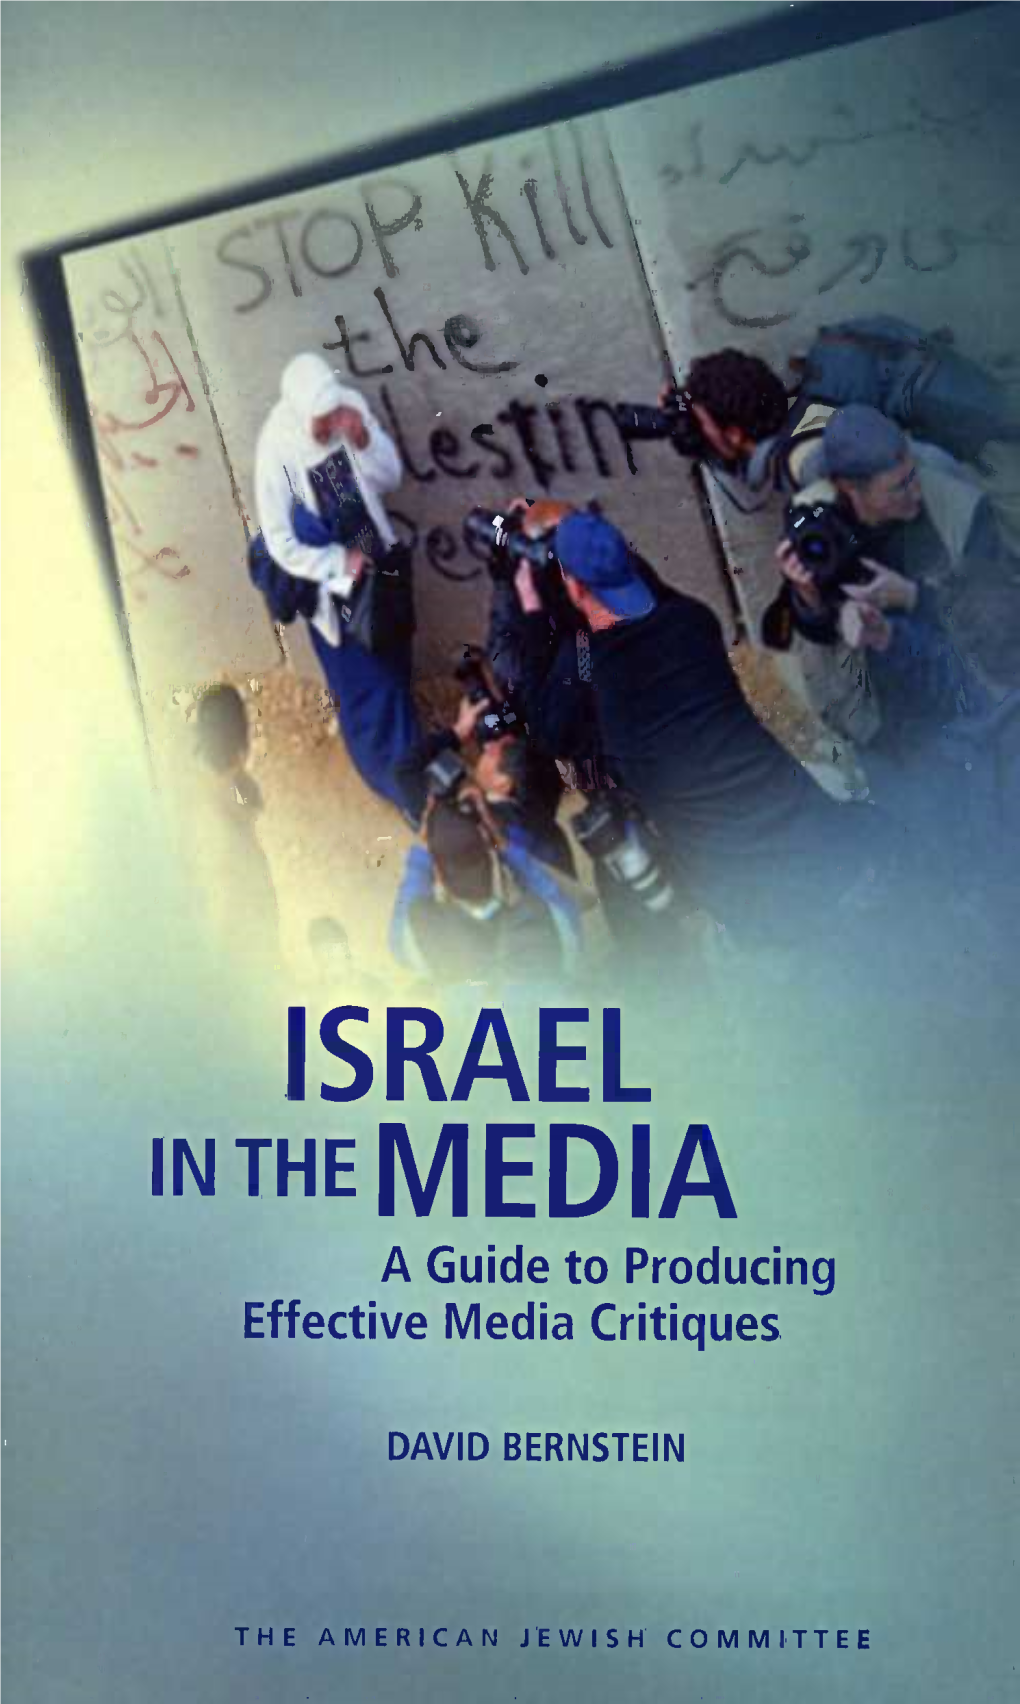 ISRAEL in the MEDIA a Guide to Producing Effective Media Critiques